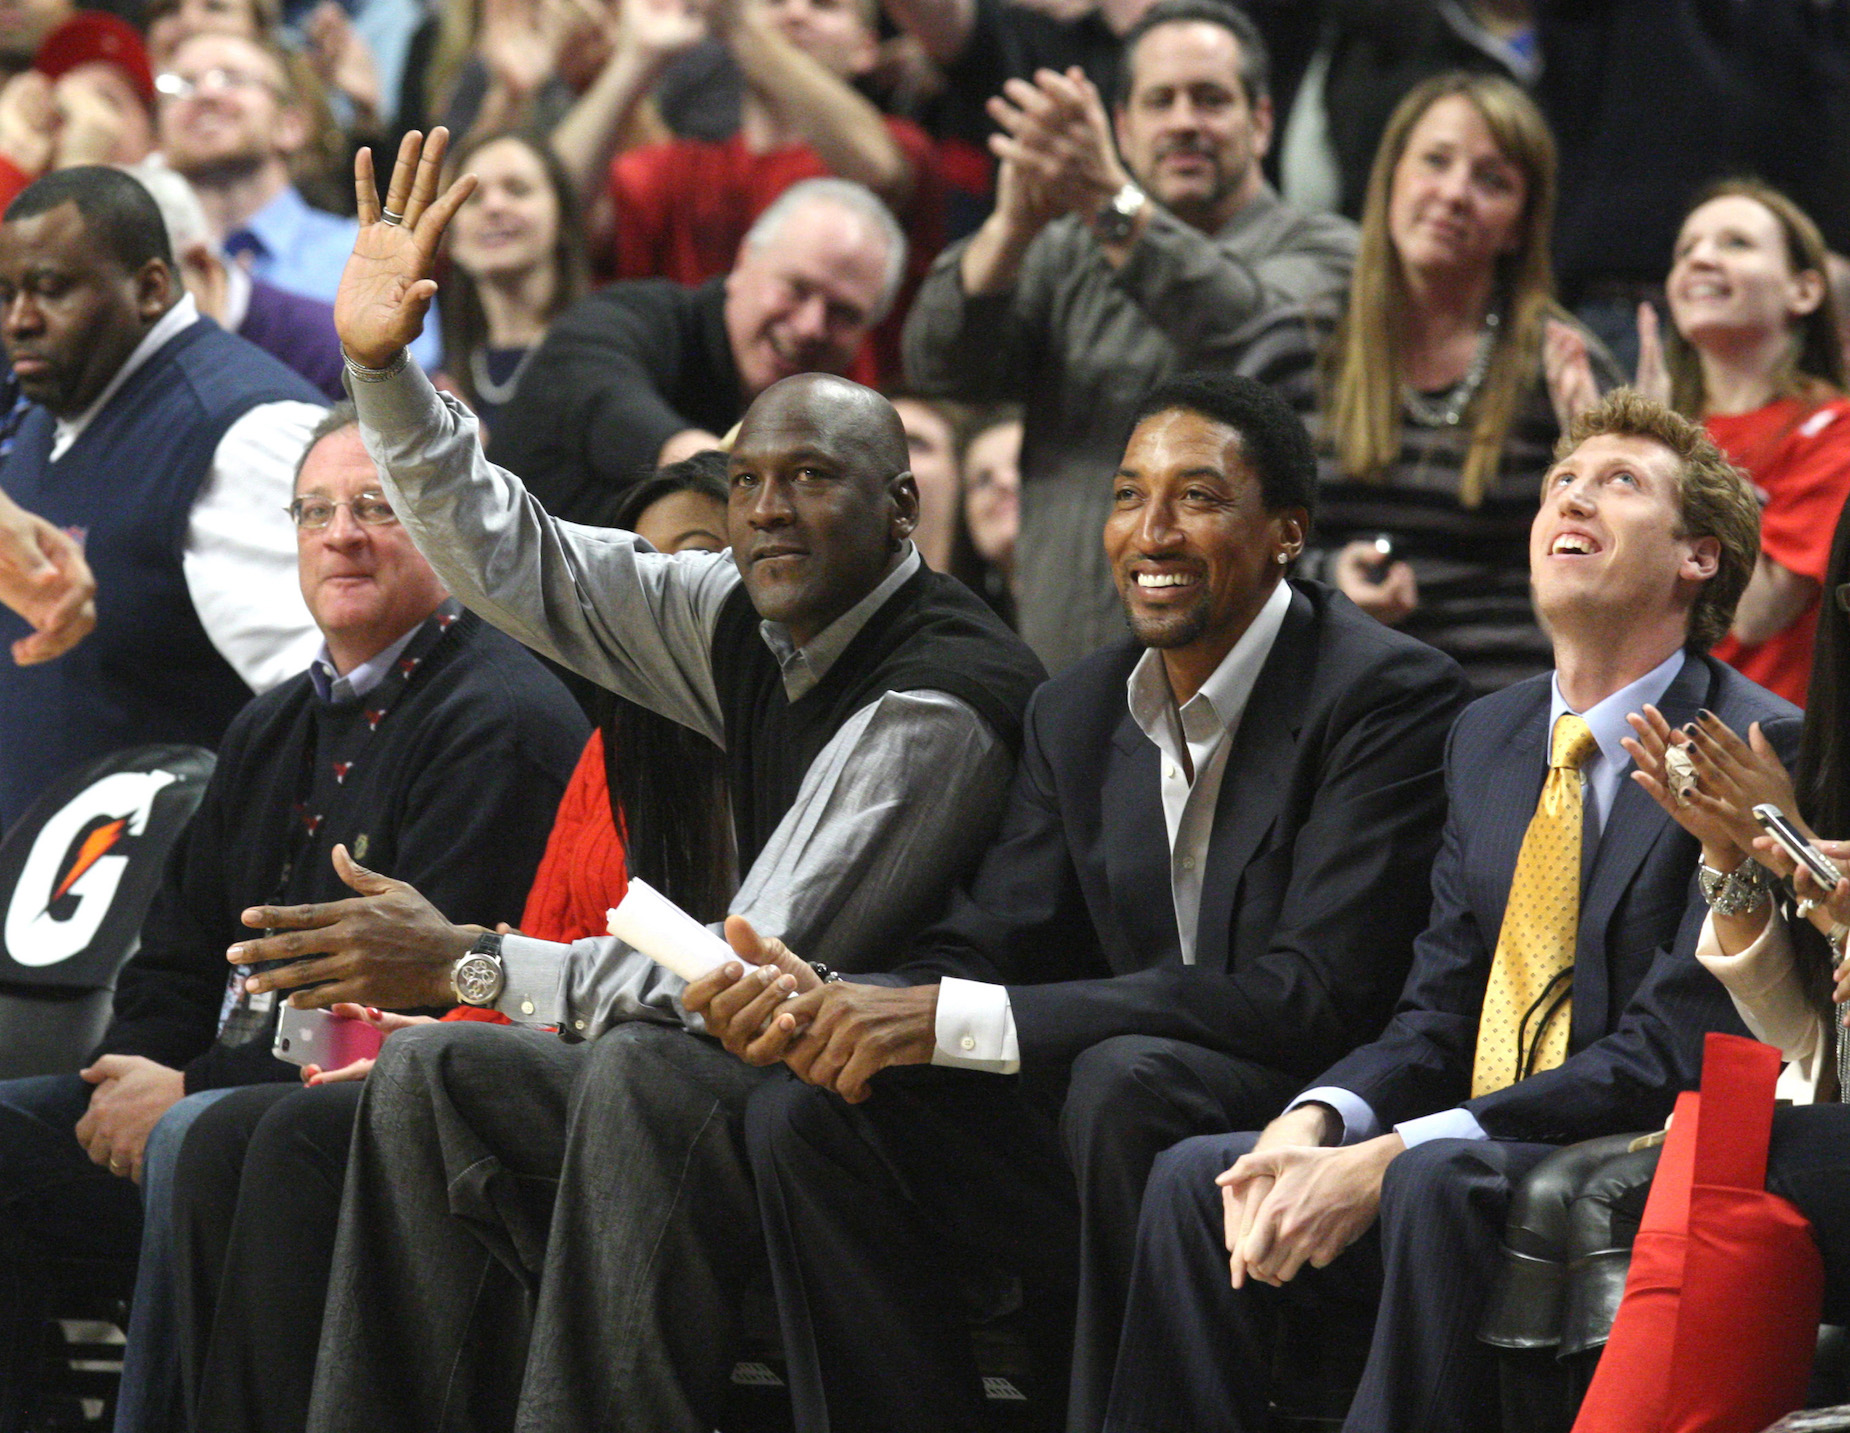 Scottie Pippen and Michael Jordan can still command big money, even though they're no longer playing.